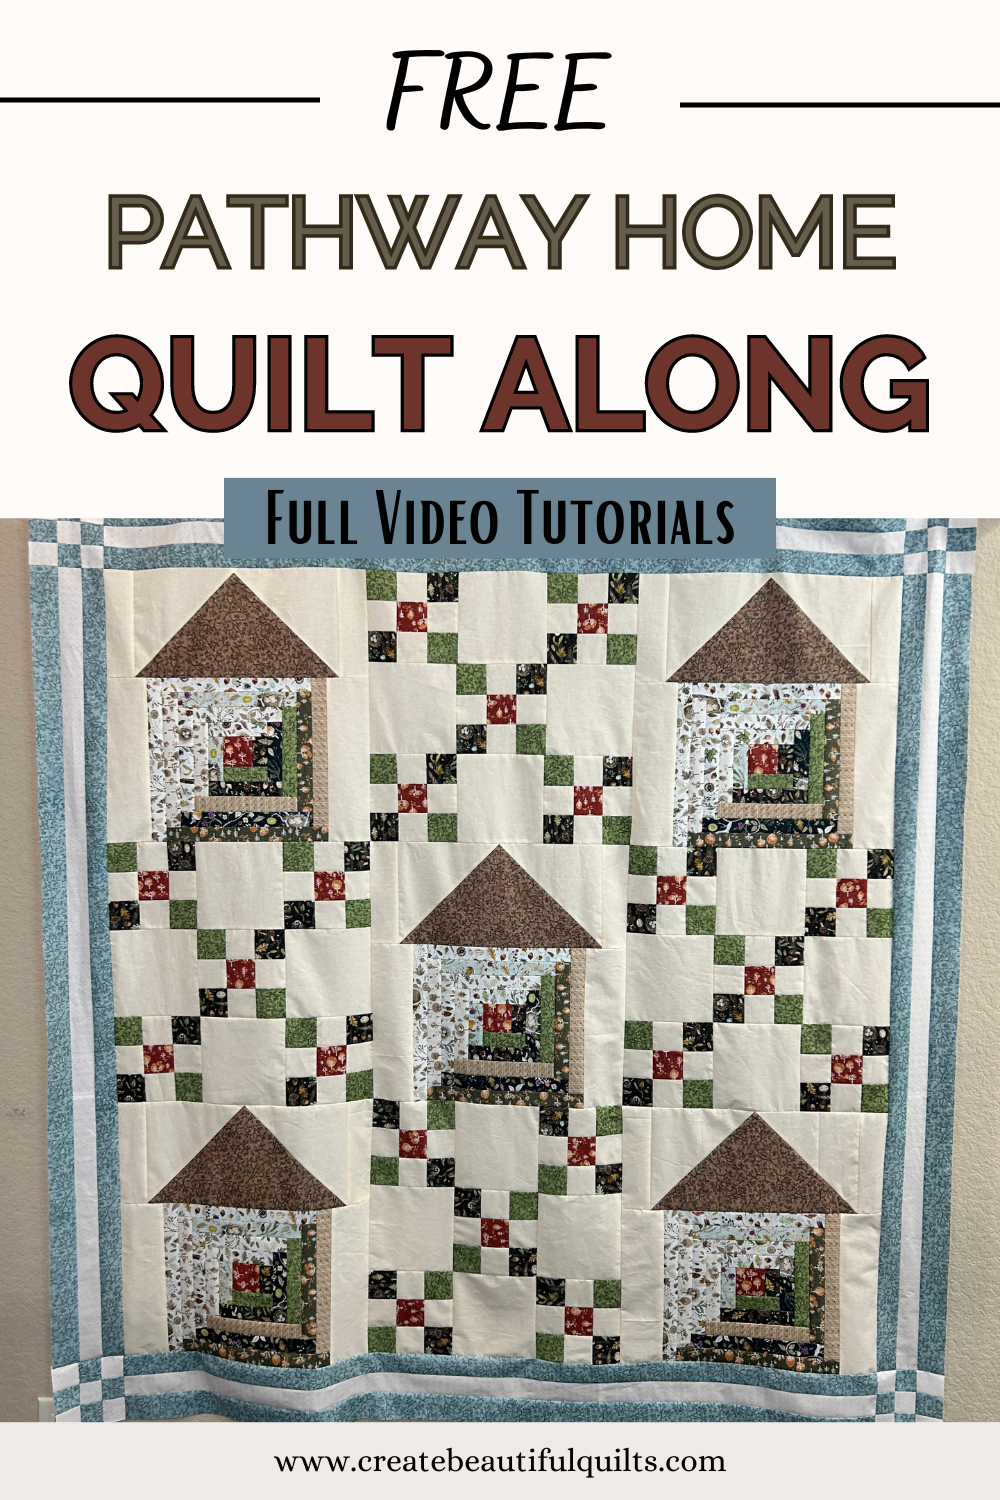 Pathway Home Free Quilt Along